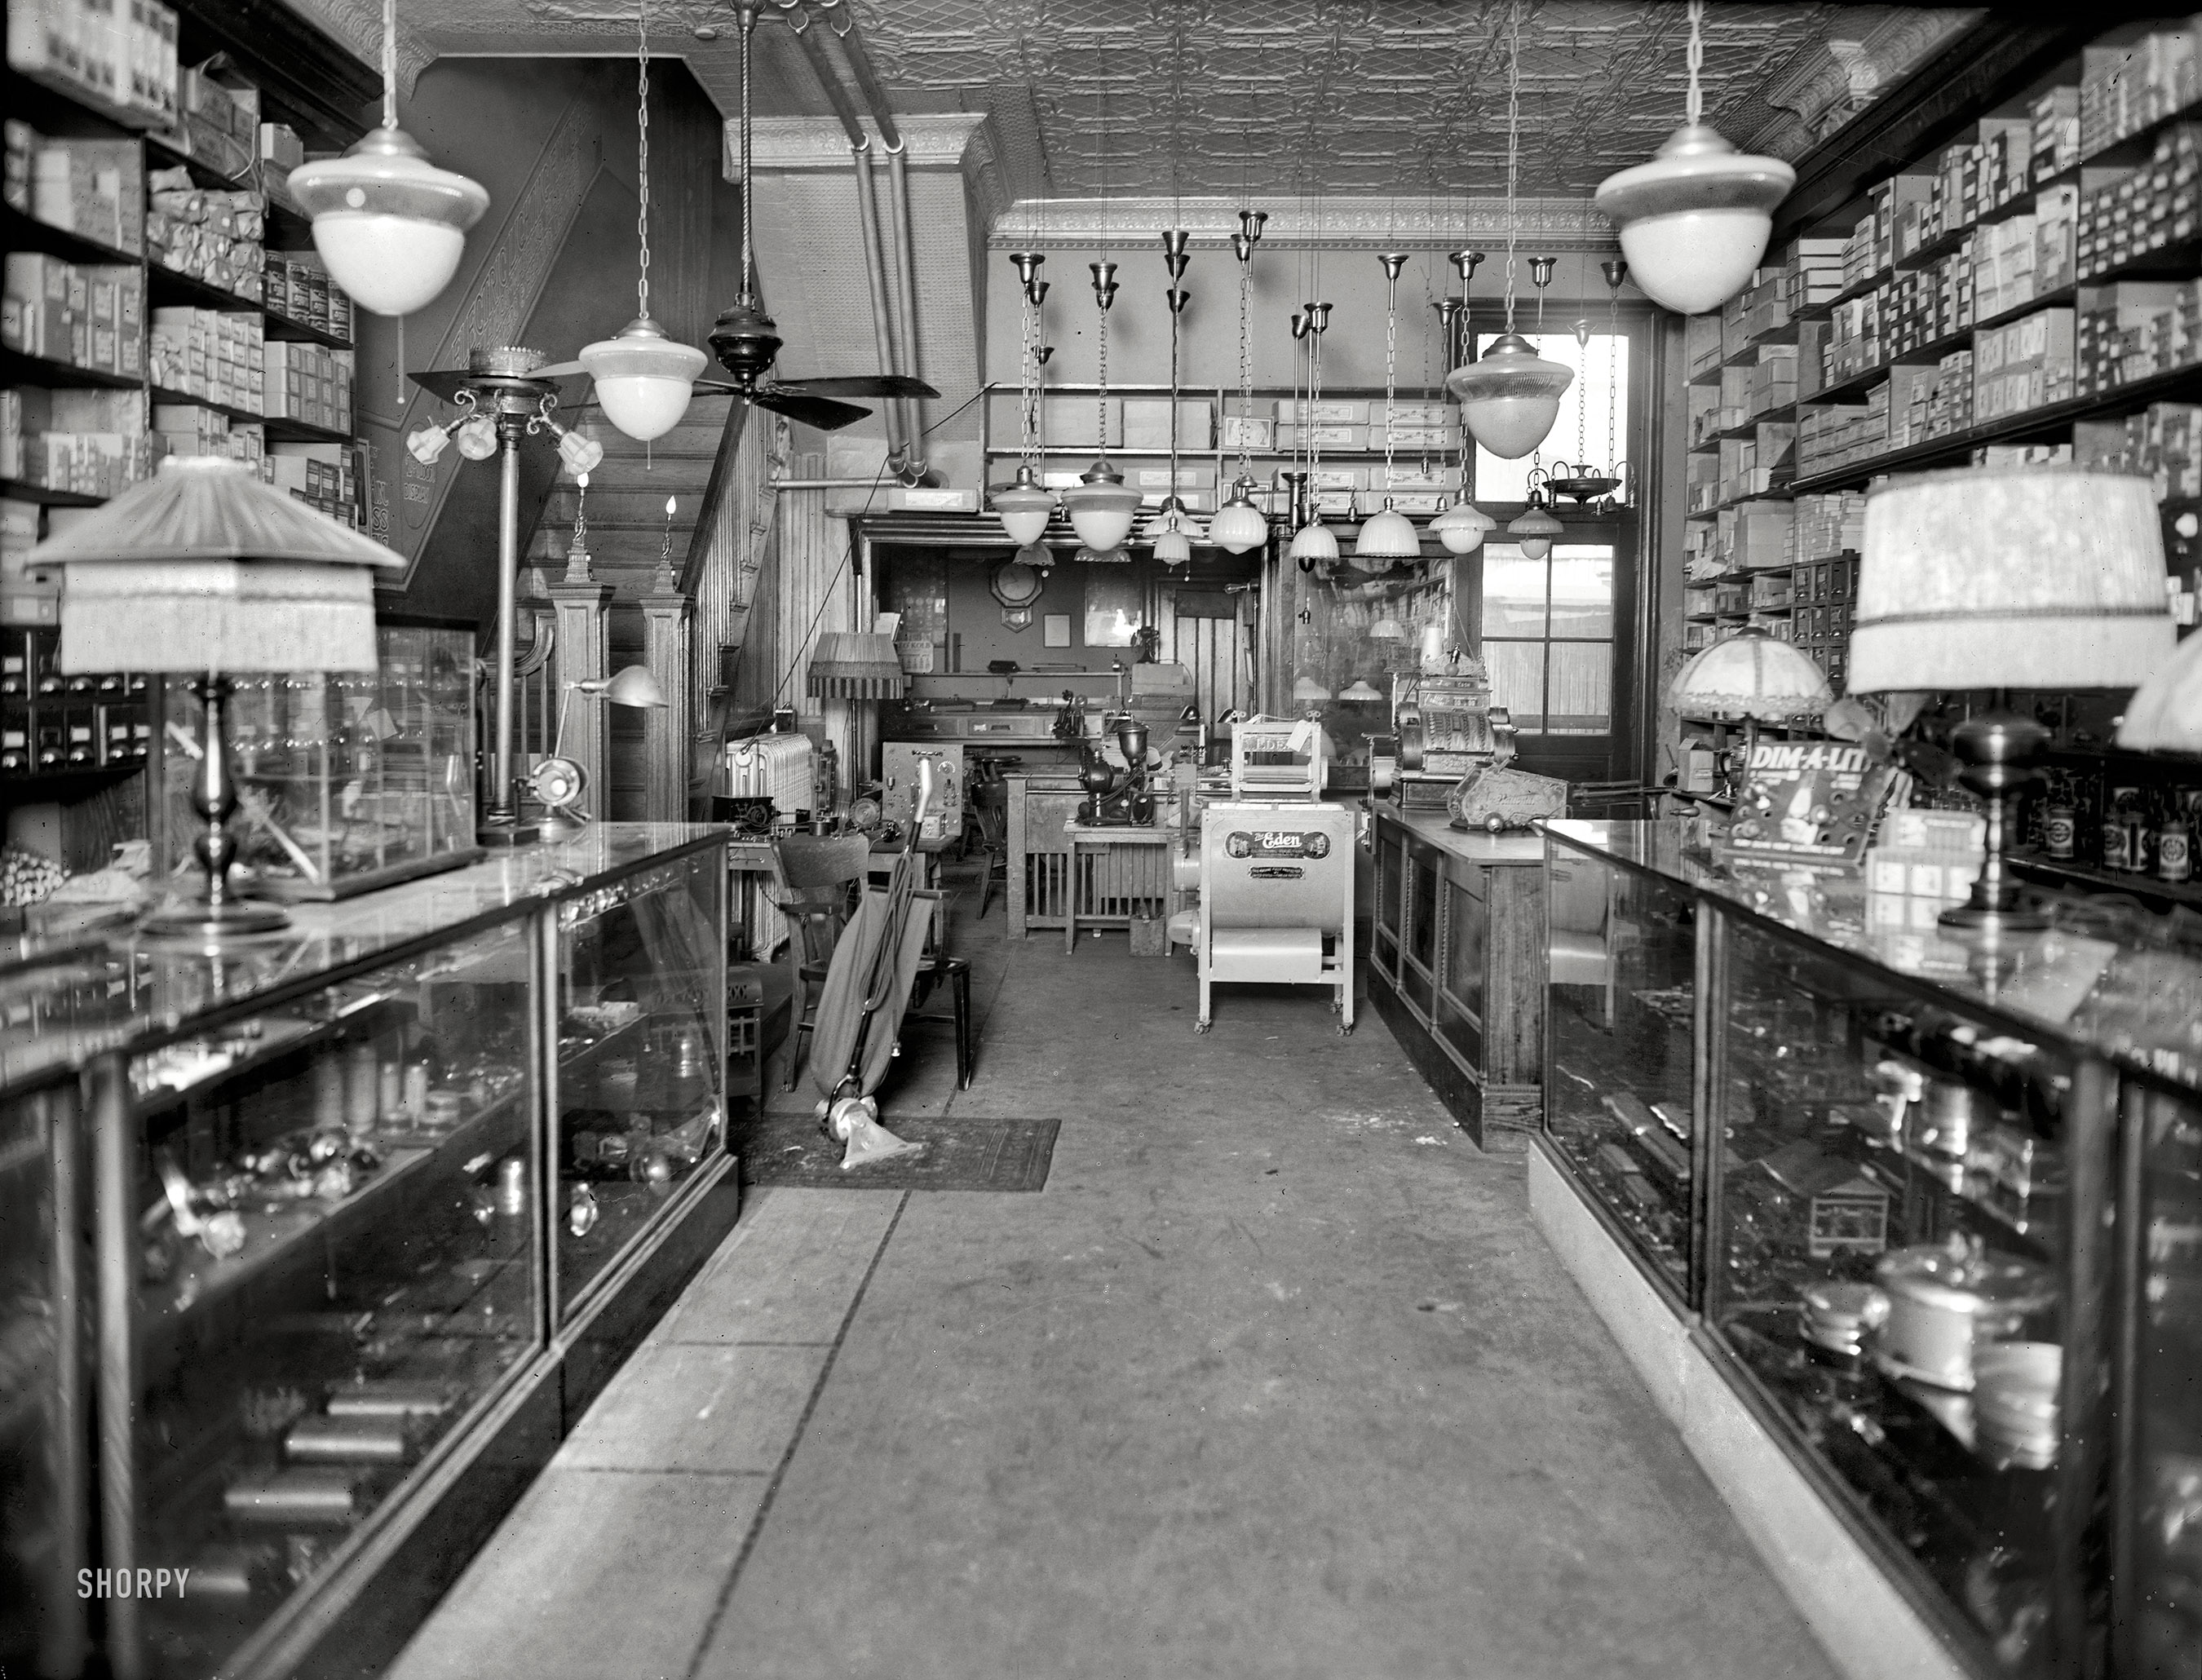 Washington, D.C., circa 1923. "Geo. W. Parezo electric shop, interior." Our fourth glimpse at the Parezo electrical supply store on Ninth Street. View full size.